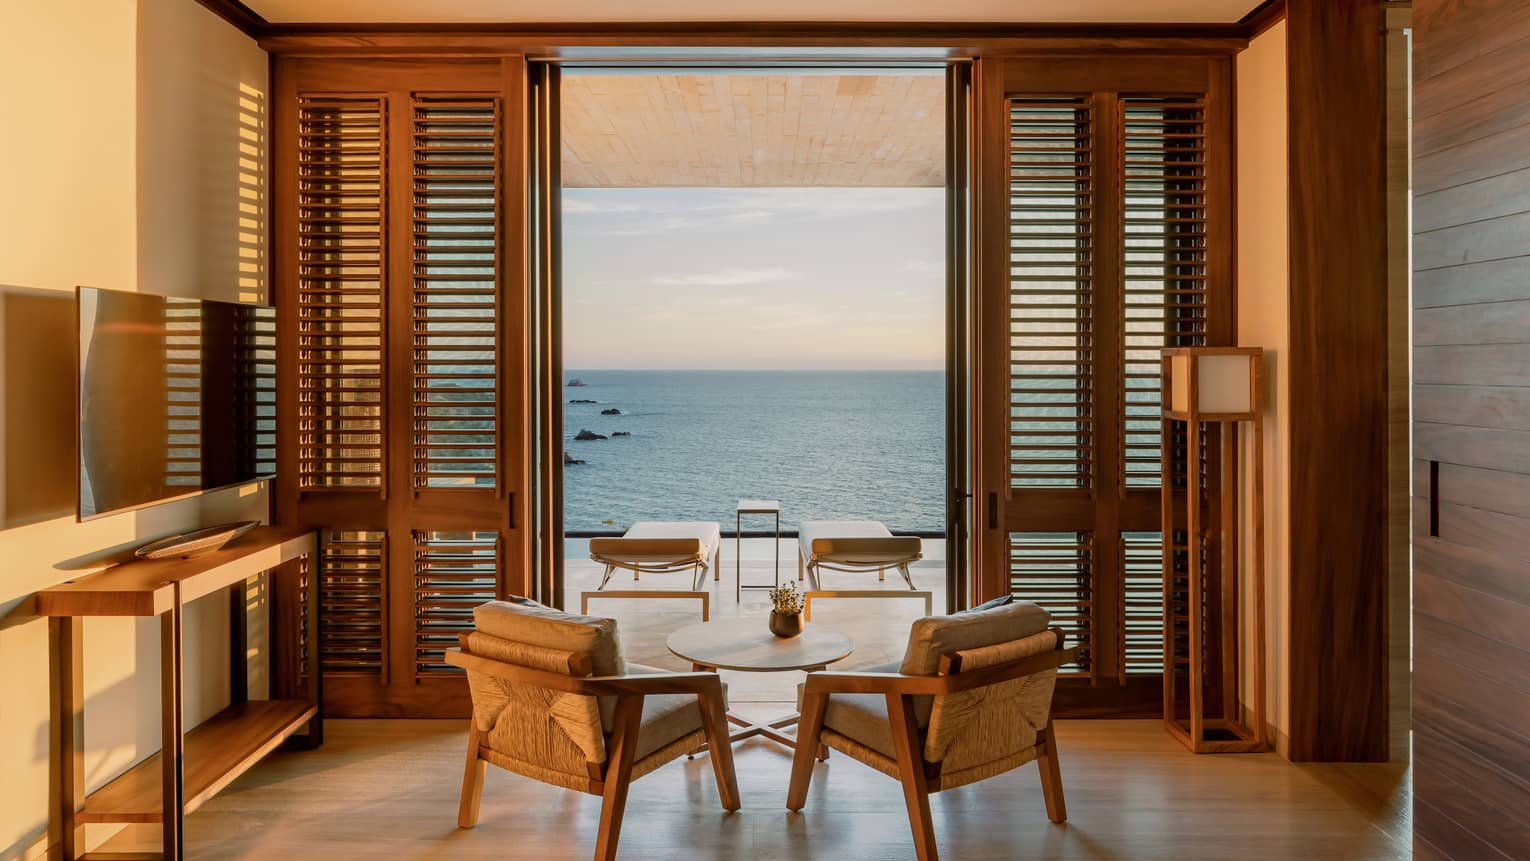 Sitting area with two arm chairs and small table facing outwards to ocean-view terrace